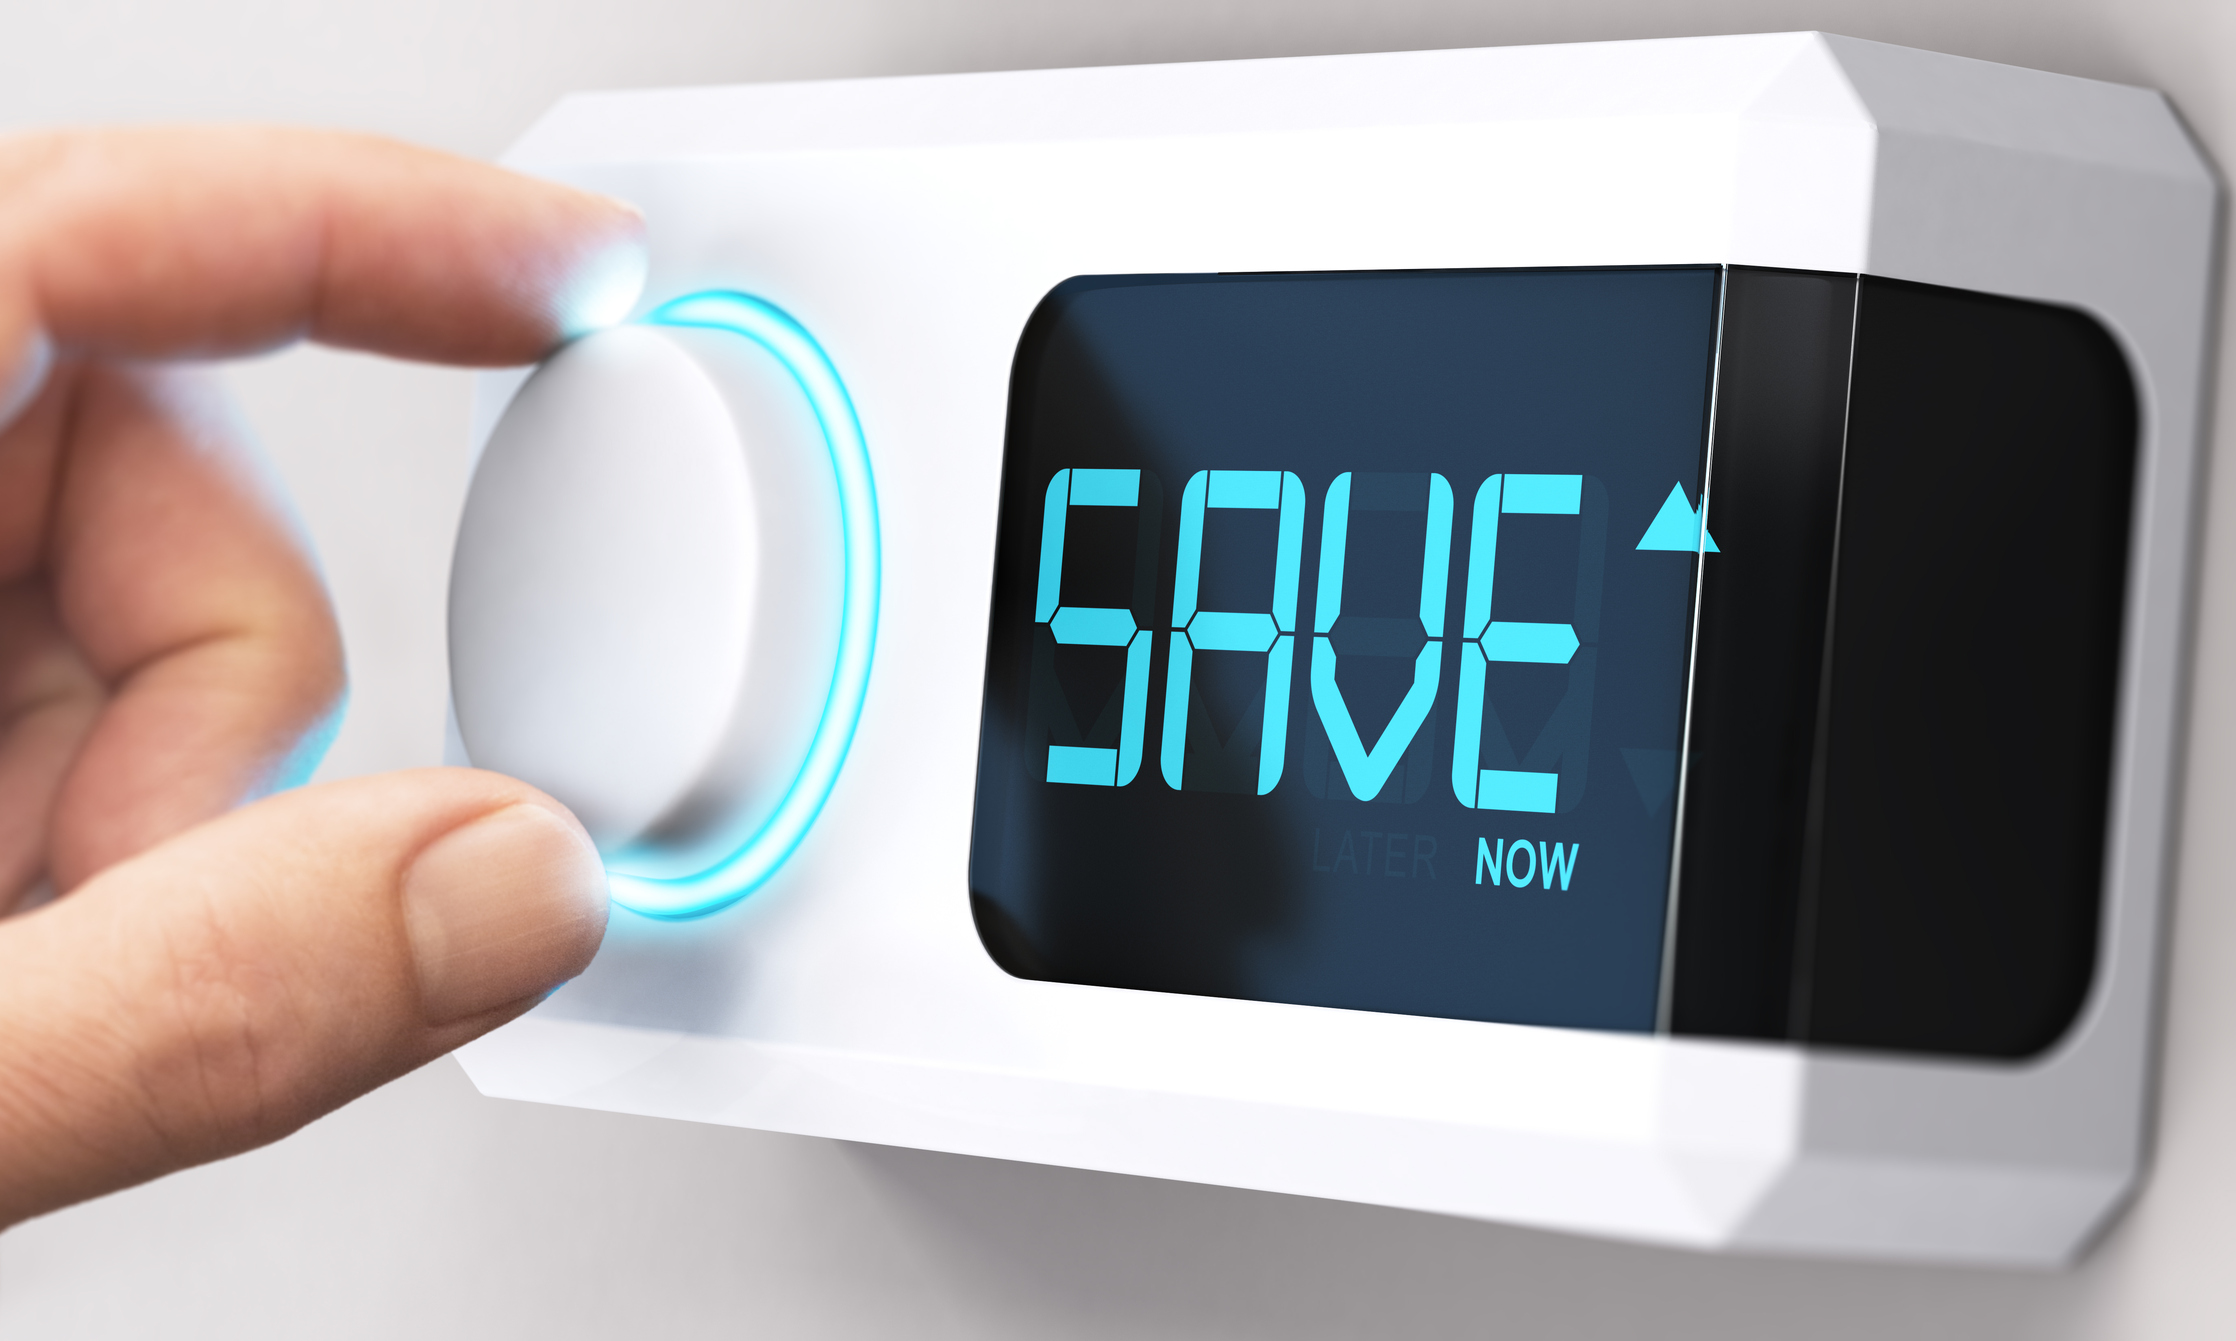 Hand on the knob of a thermostat that says “Save now!